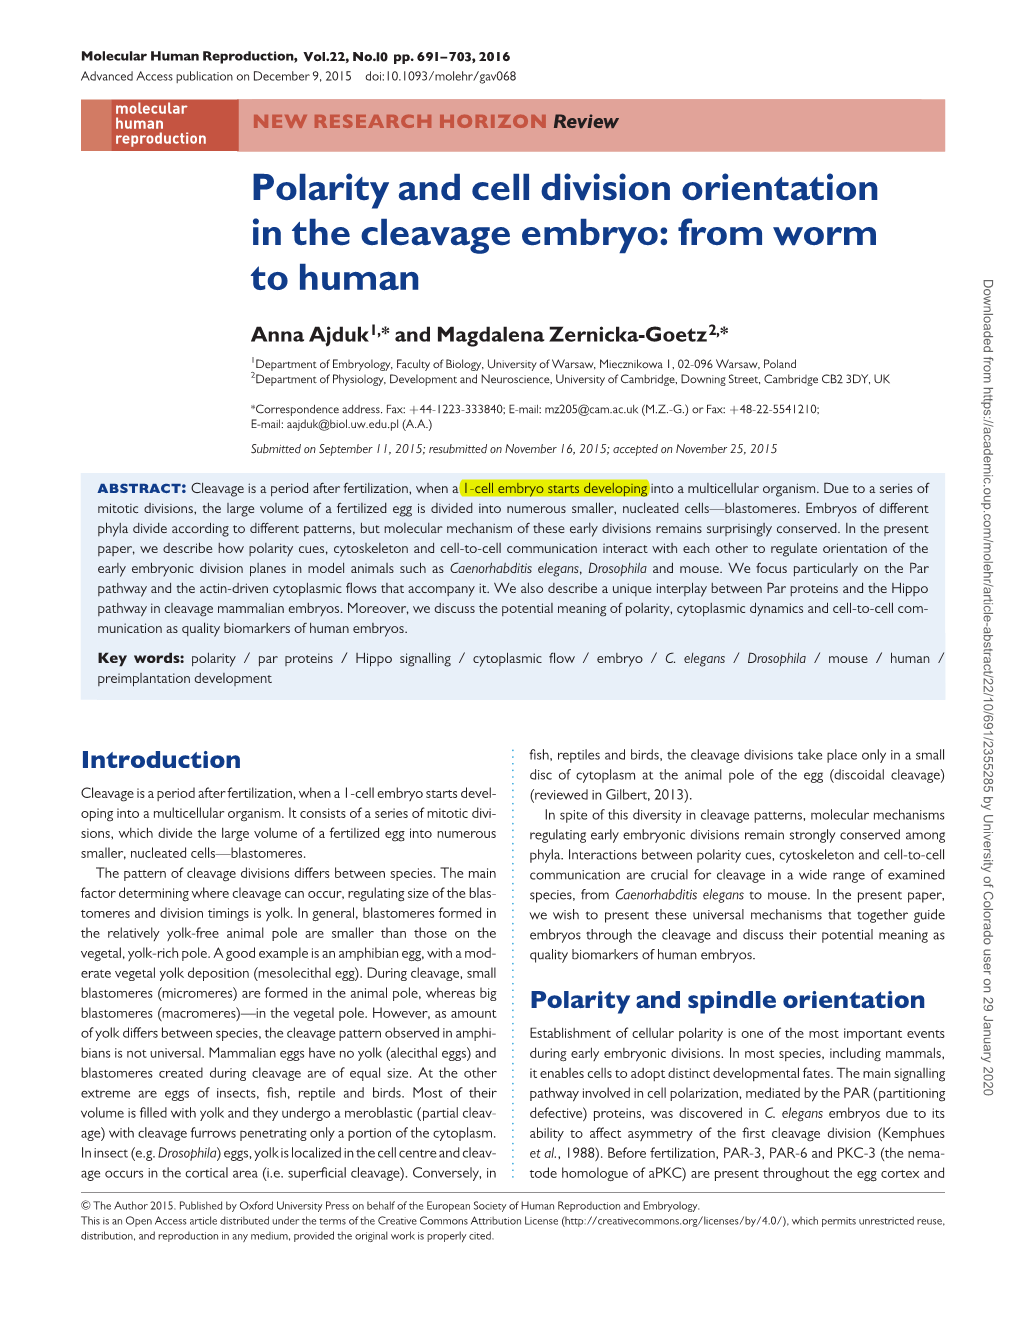 Polarity and Cell Division Orientation in the Cleavage Embryo: from Worm